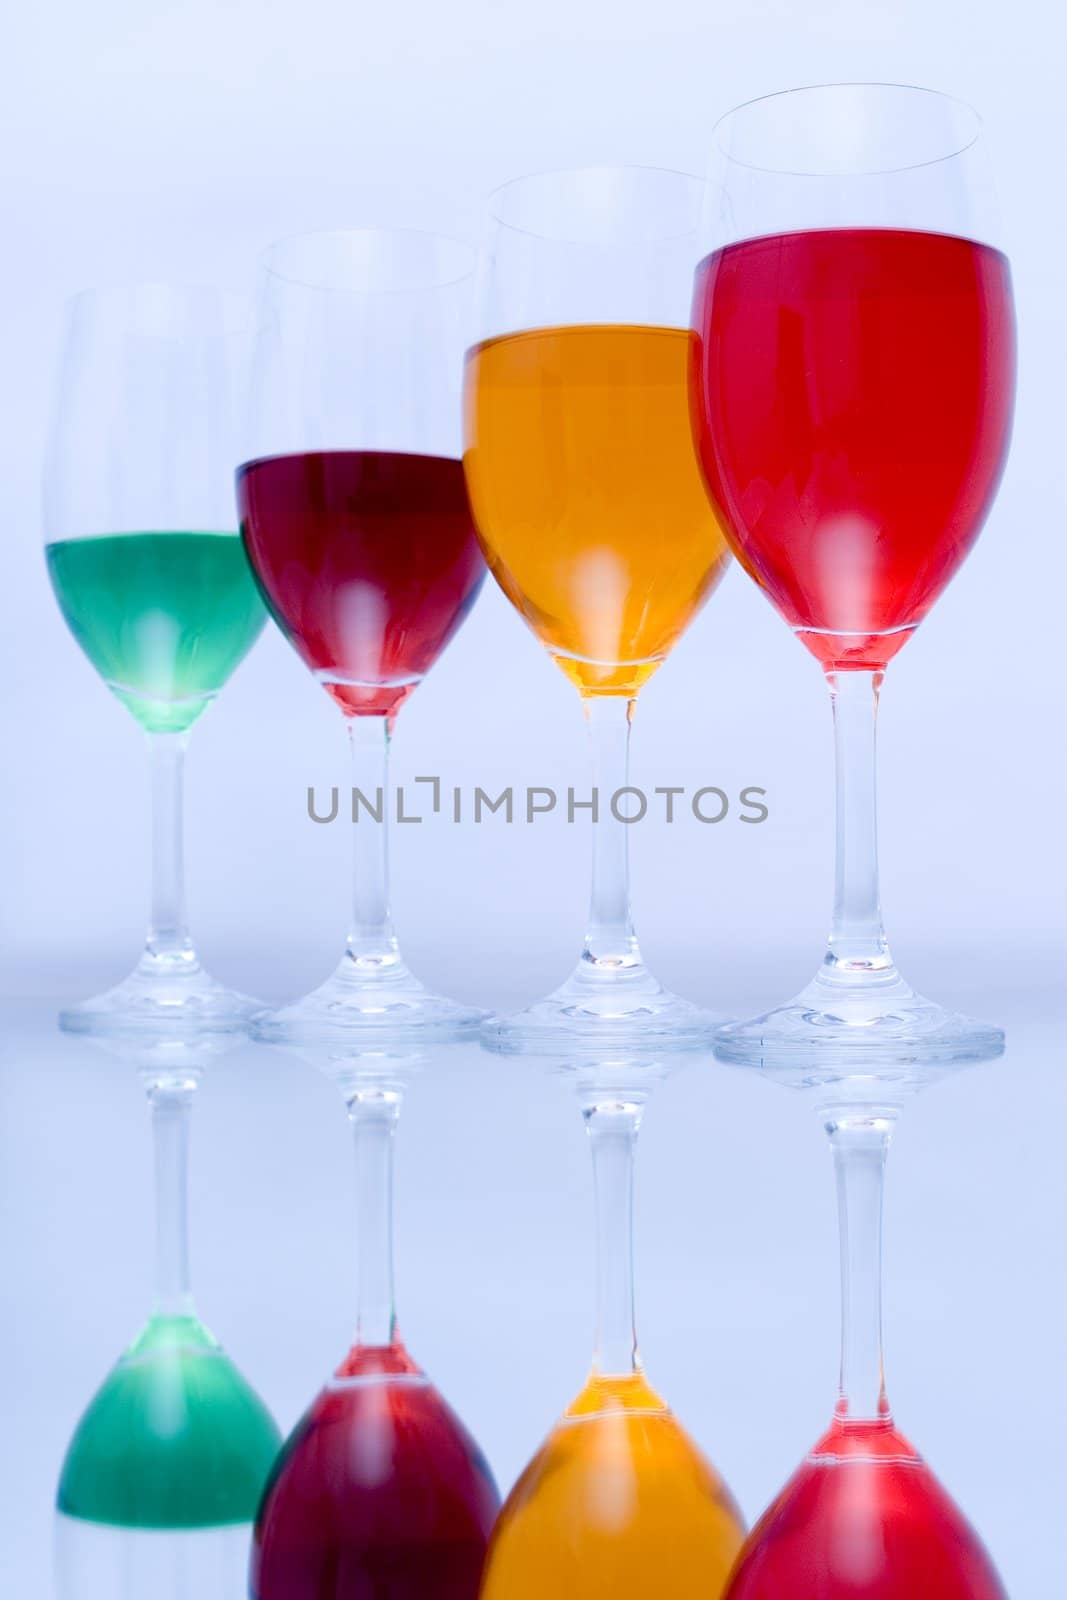 Colored glasses arranged on a glass substrate